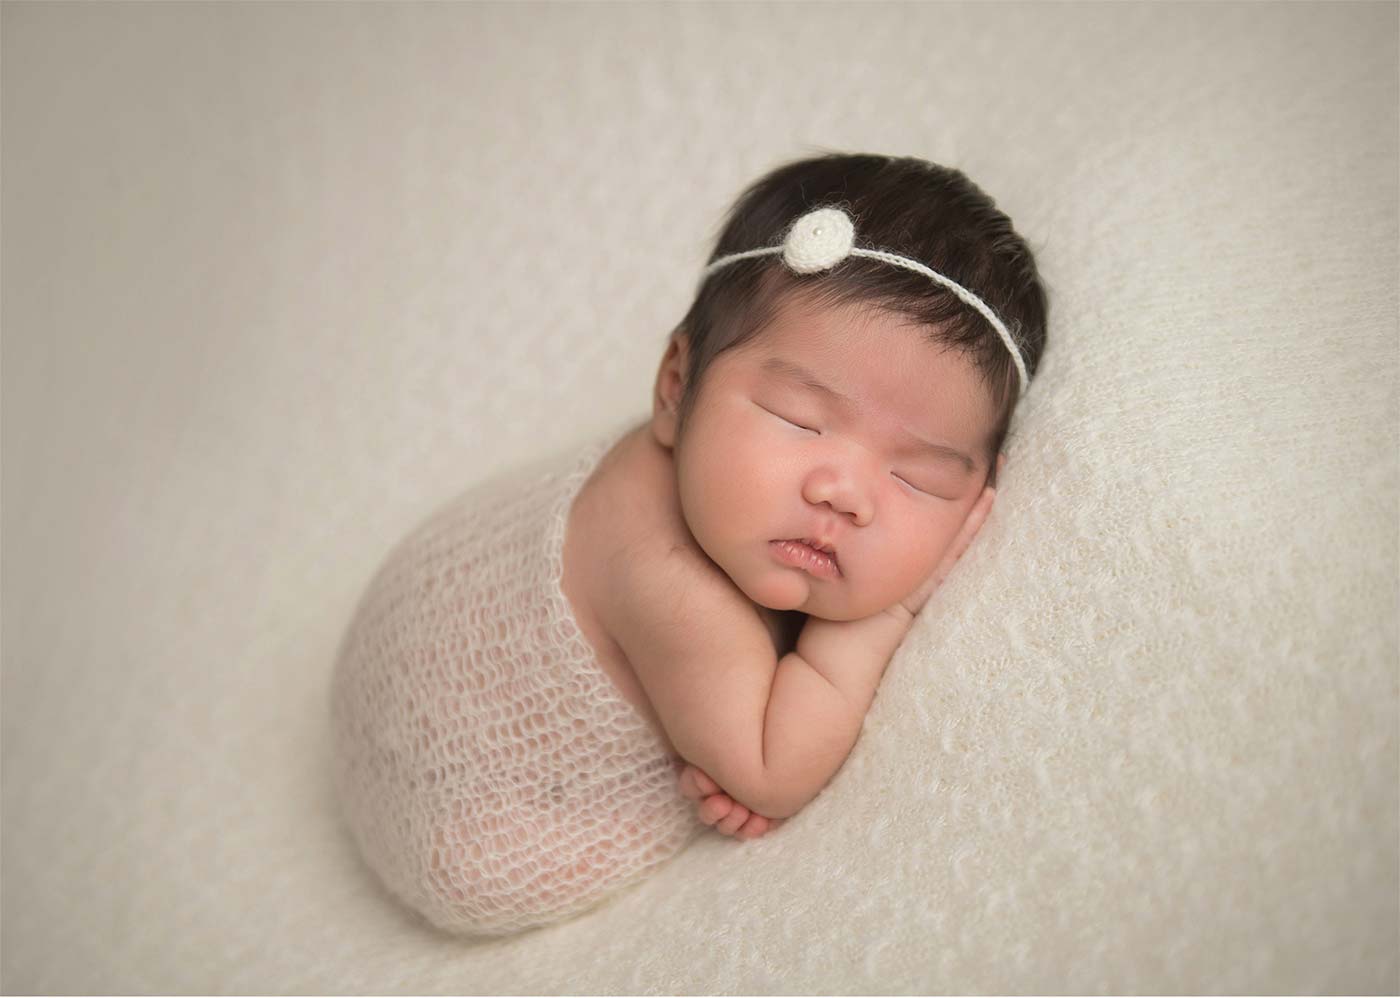 A newborn baby peacefully sleeps on their side, wrapped in a soft, cream-colored knitted blanket. The baby has a small headband adorned with a delicate flower, and they rest their head on their arms against a matching cream-colored background.